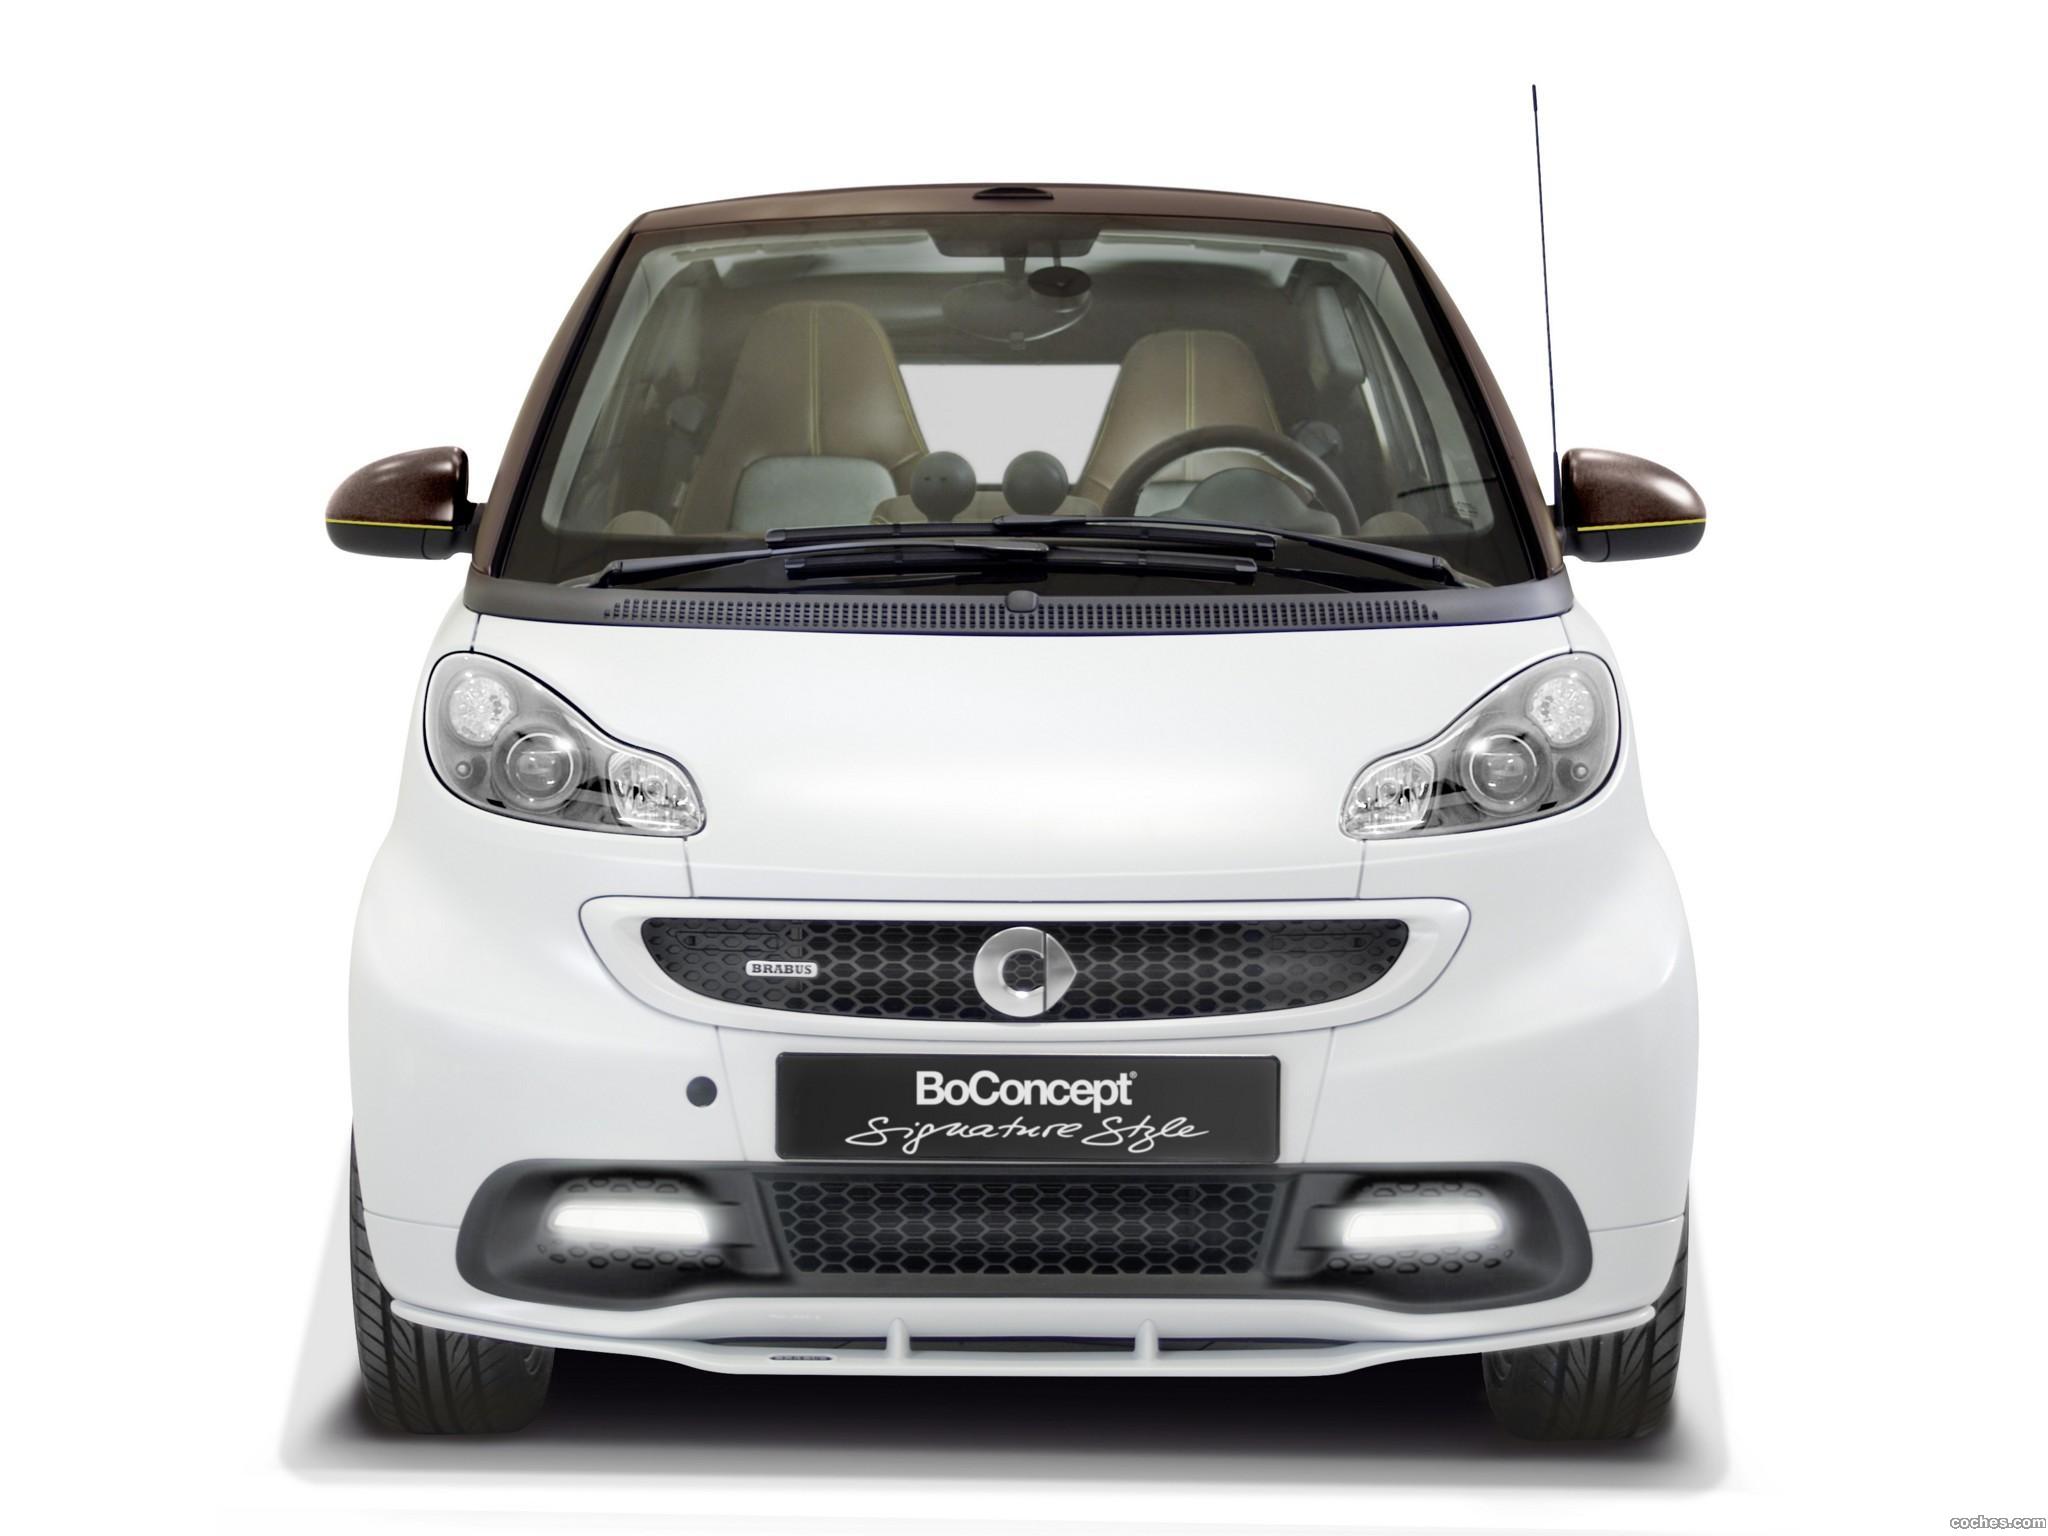 brabus_smart-fortwo-by-boconcept-2013_r3